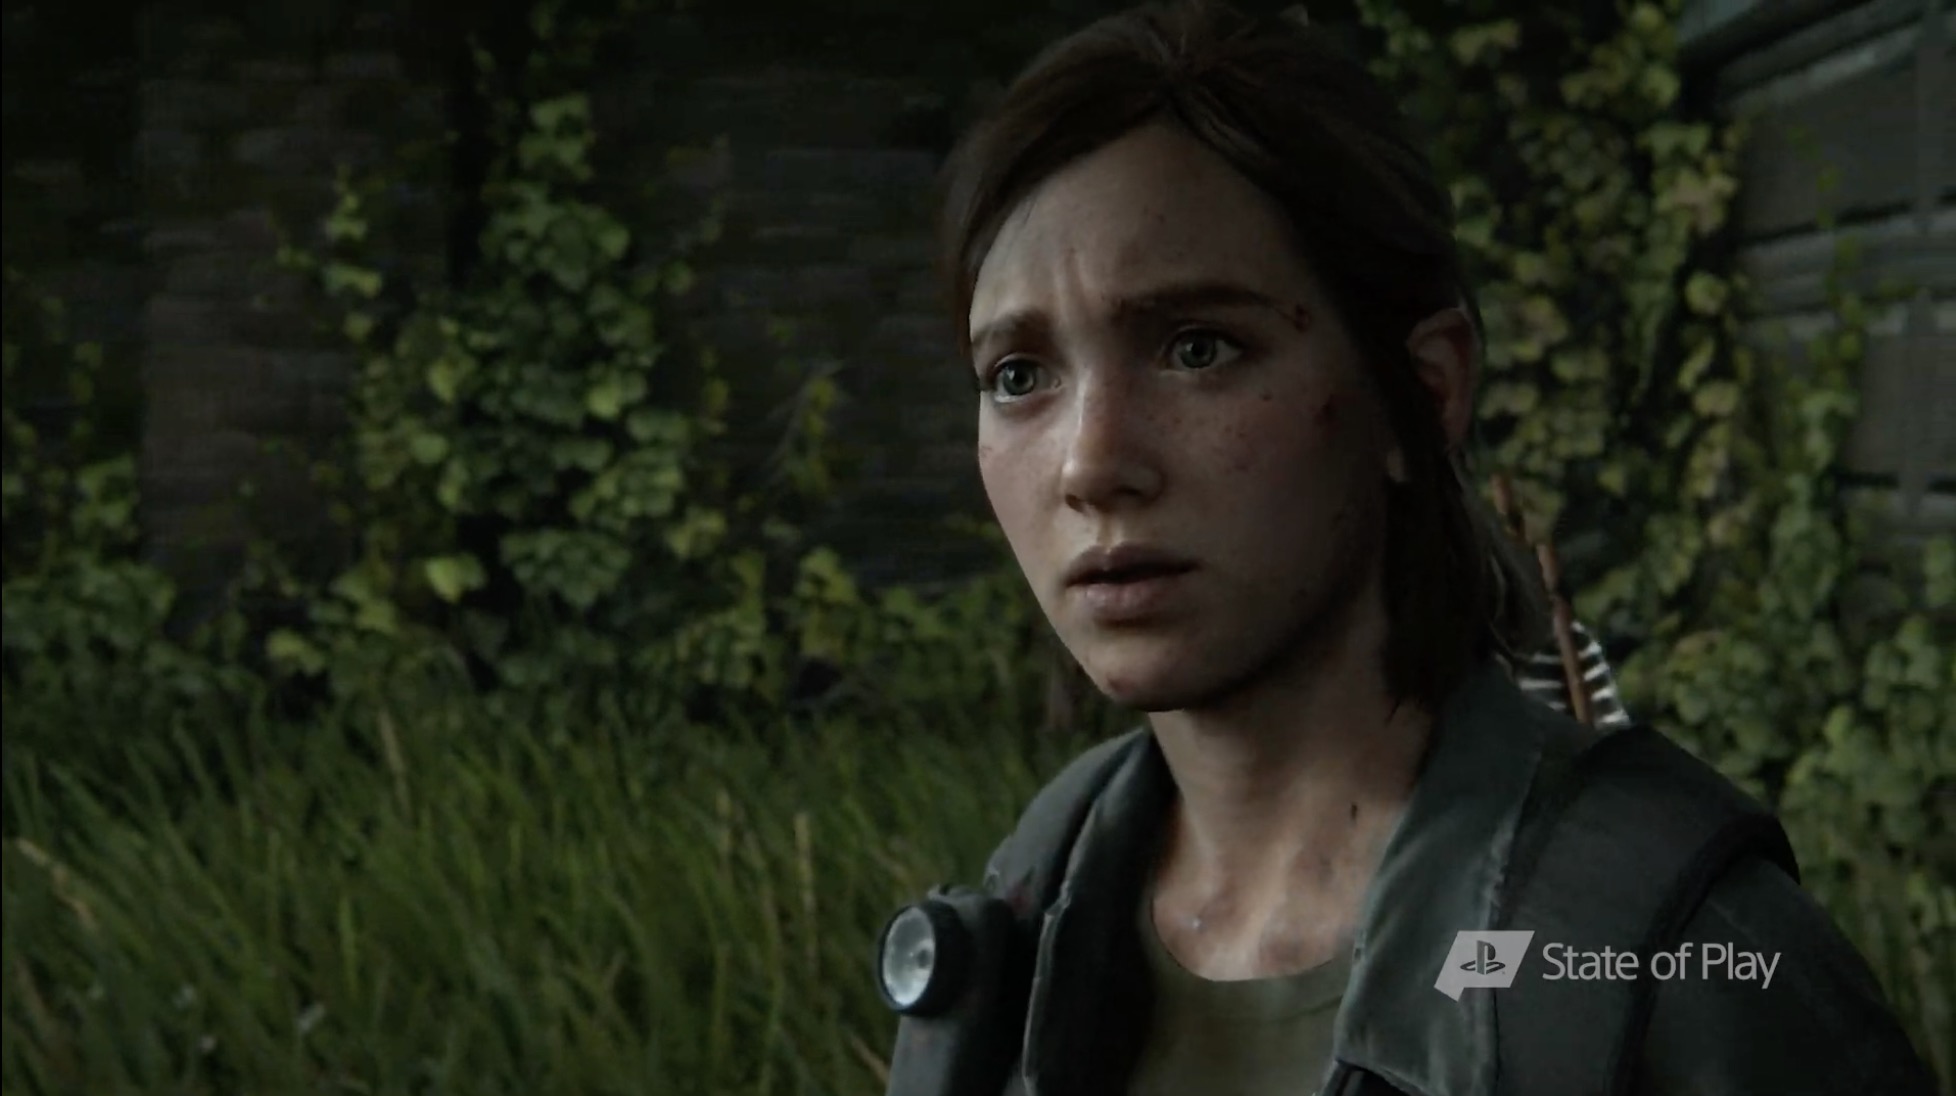 The Last of Us 2 companions can take out enemies for you